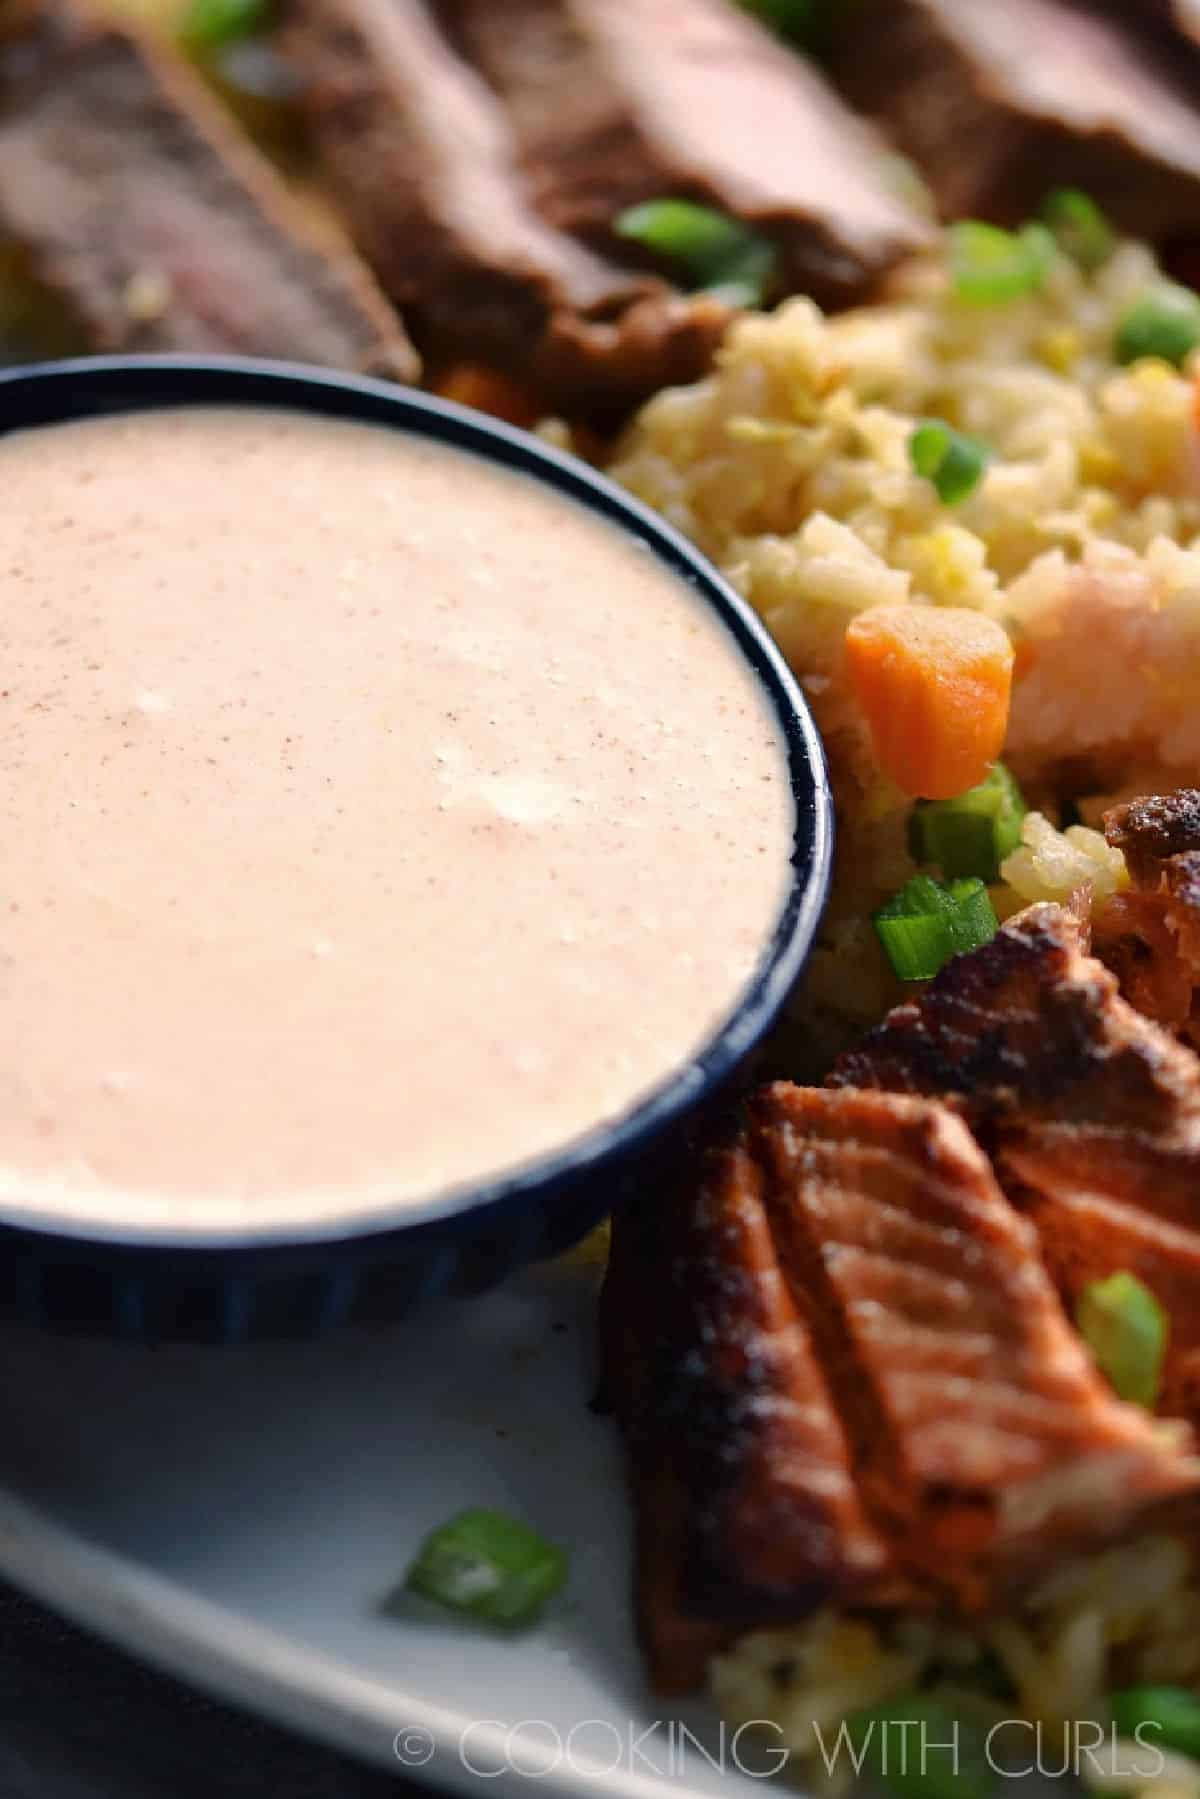 Yum Yum Sauce in a small bowl surrounded by sliced steak, salmon, and fried rice.